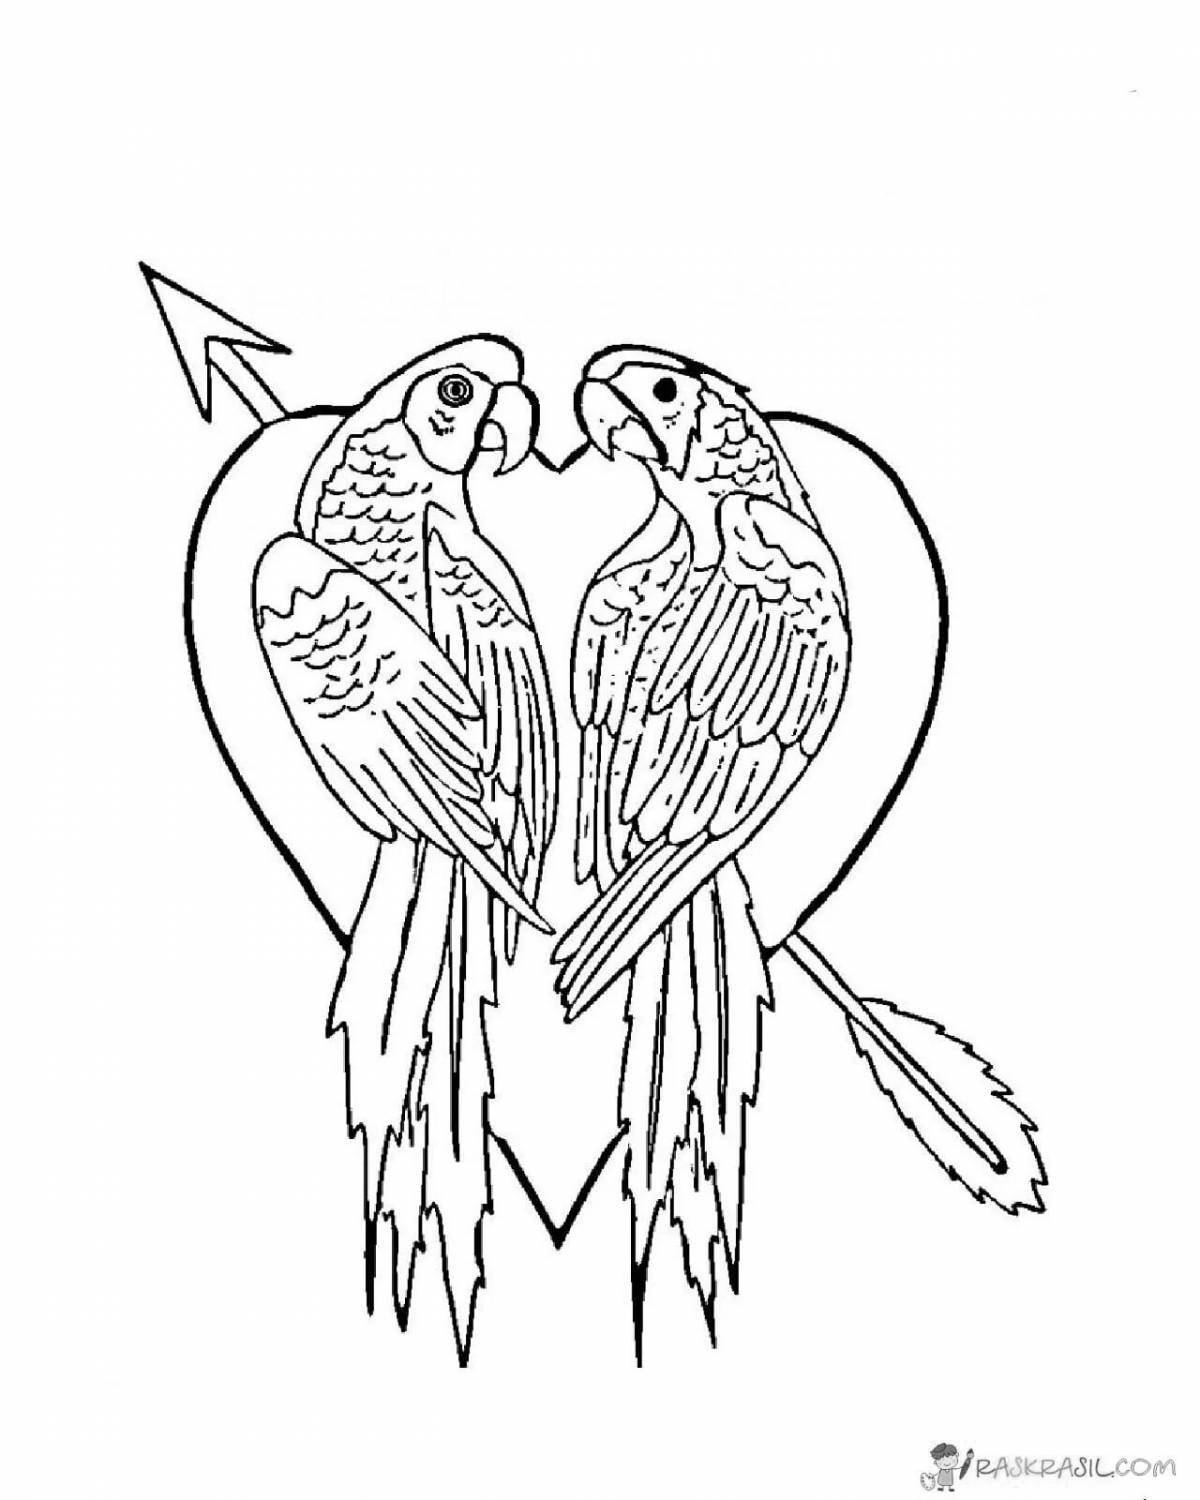 Fairytale coloring book for girls with birds